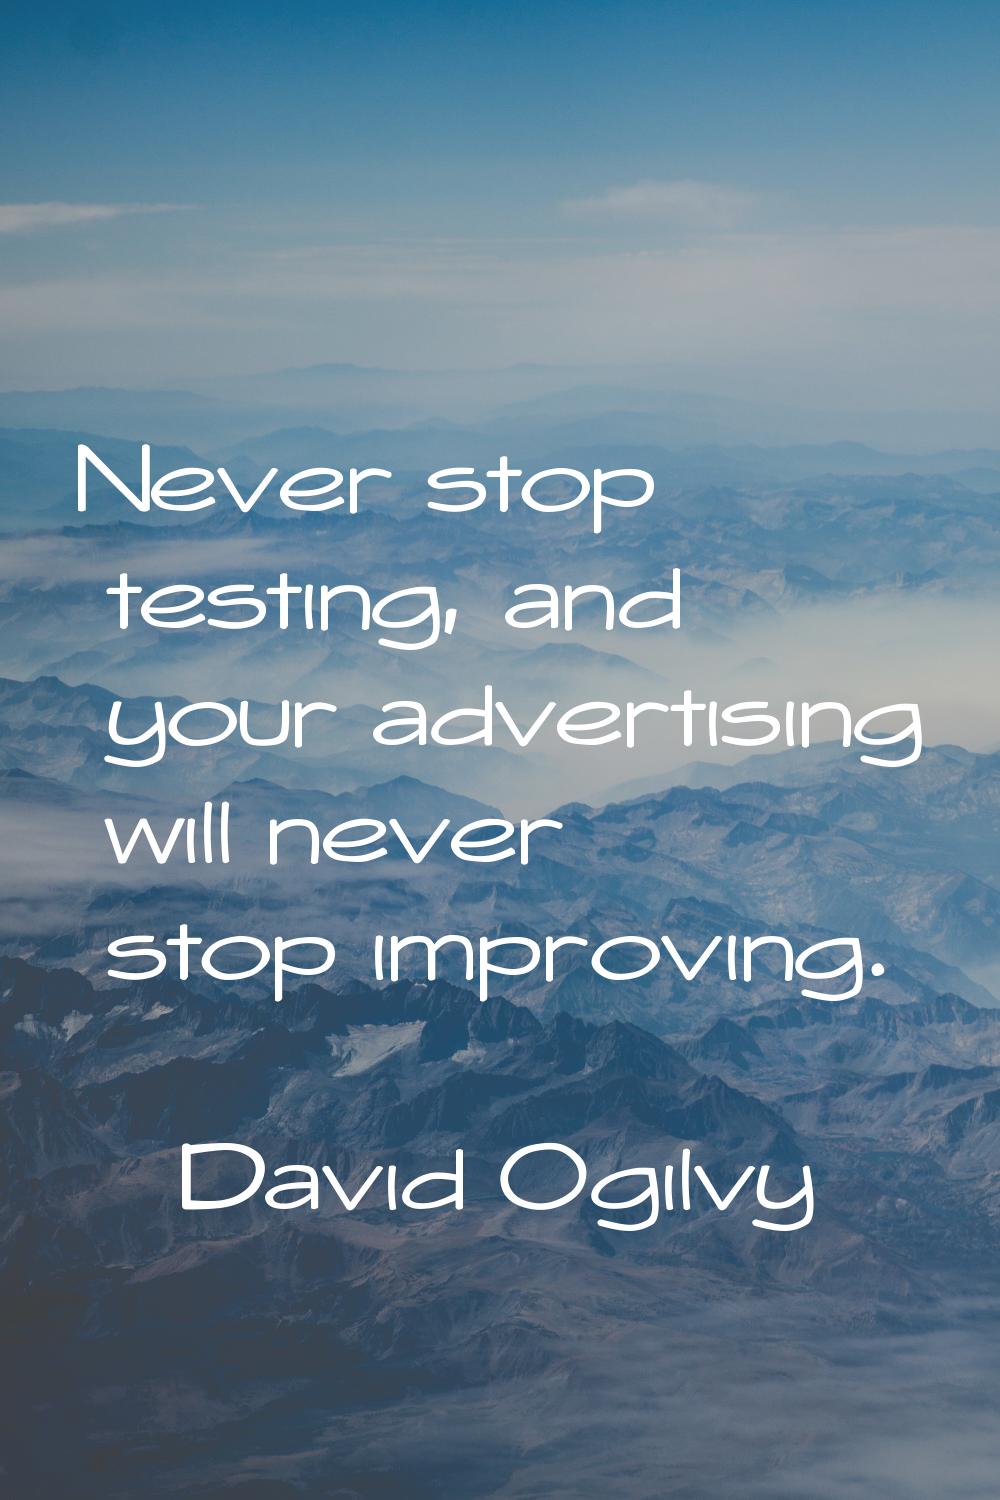 Never stop testing, and your advertising will never stop improving.